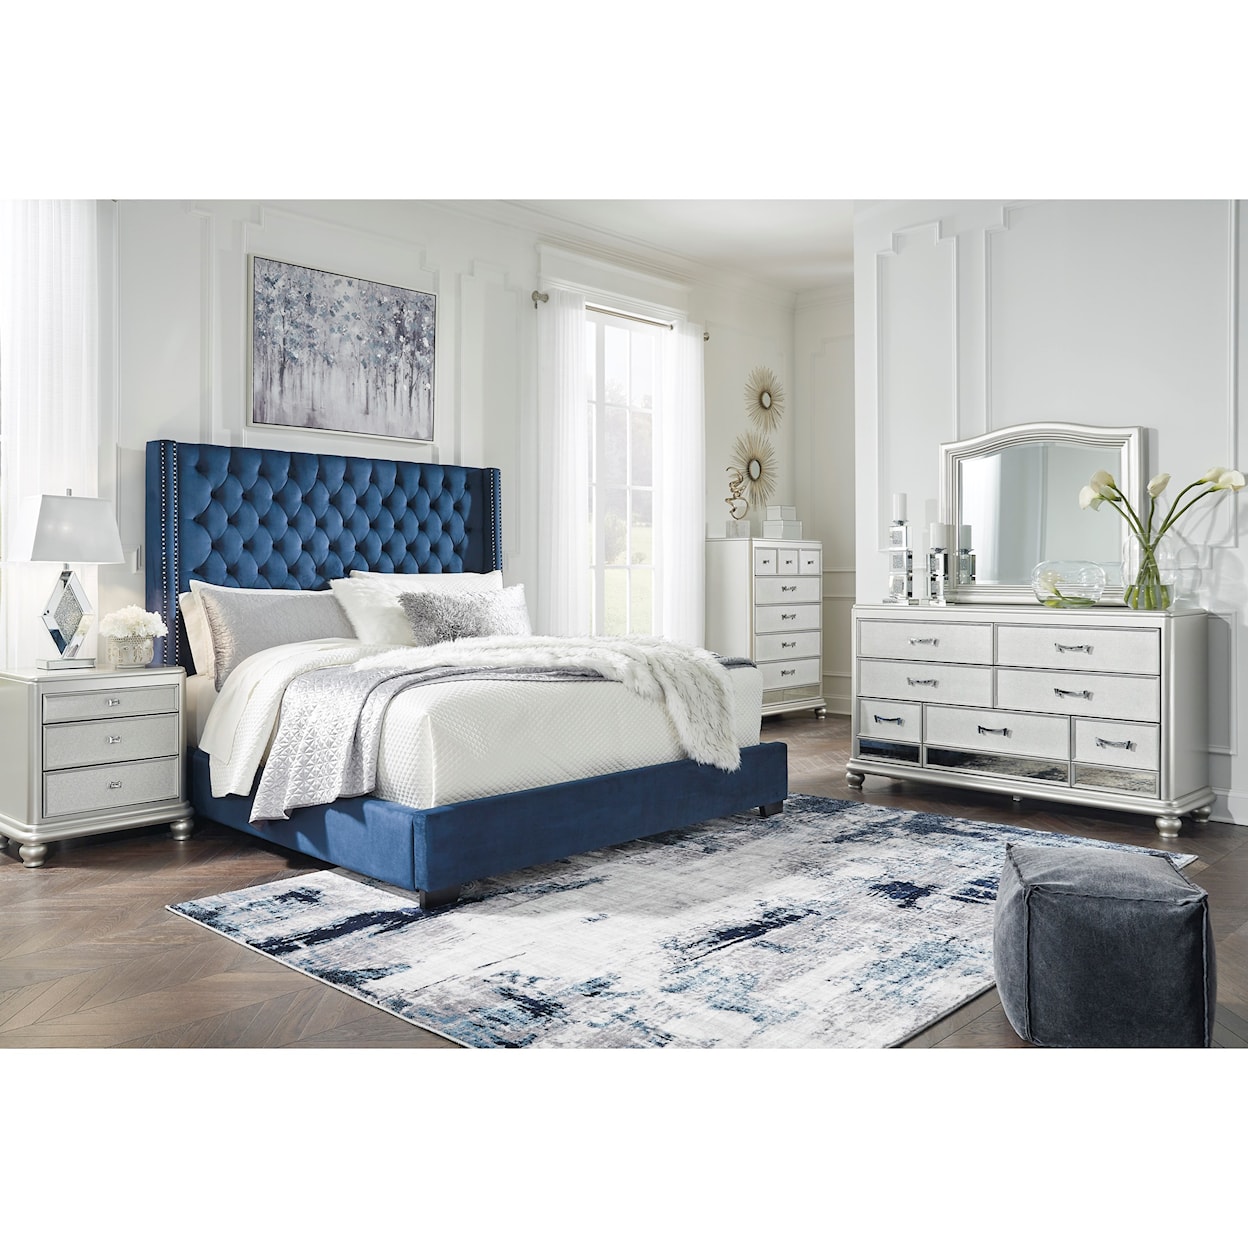 Signature Design by Ashley Coralayne 7PC King Bedroom Group